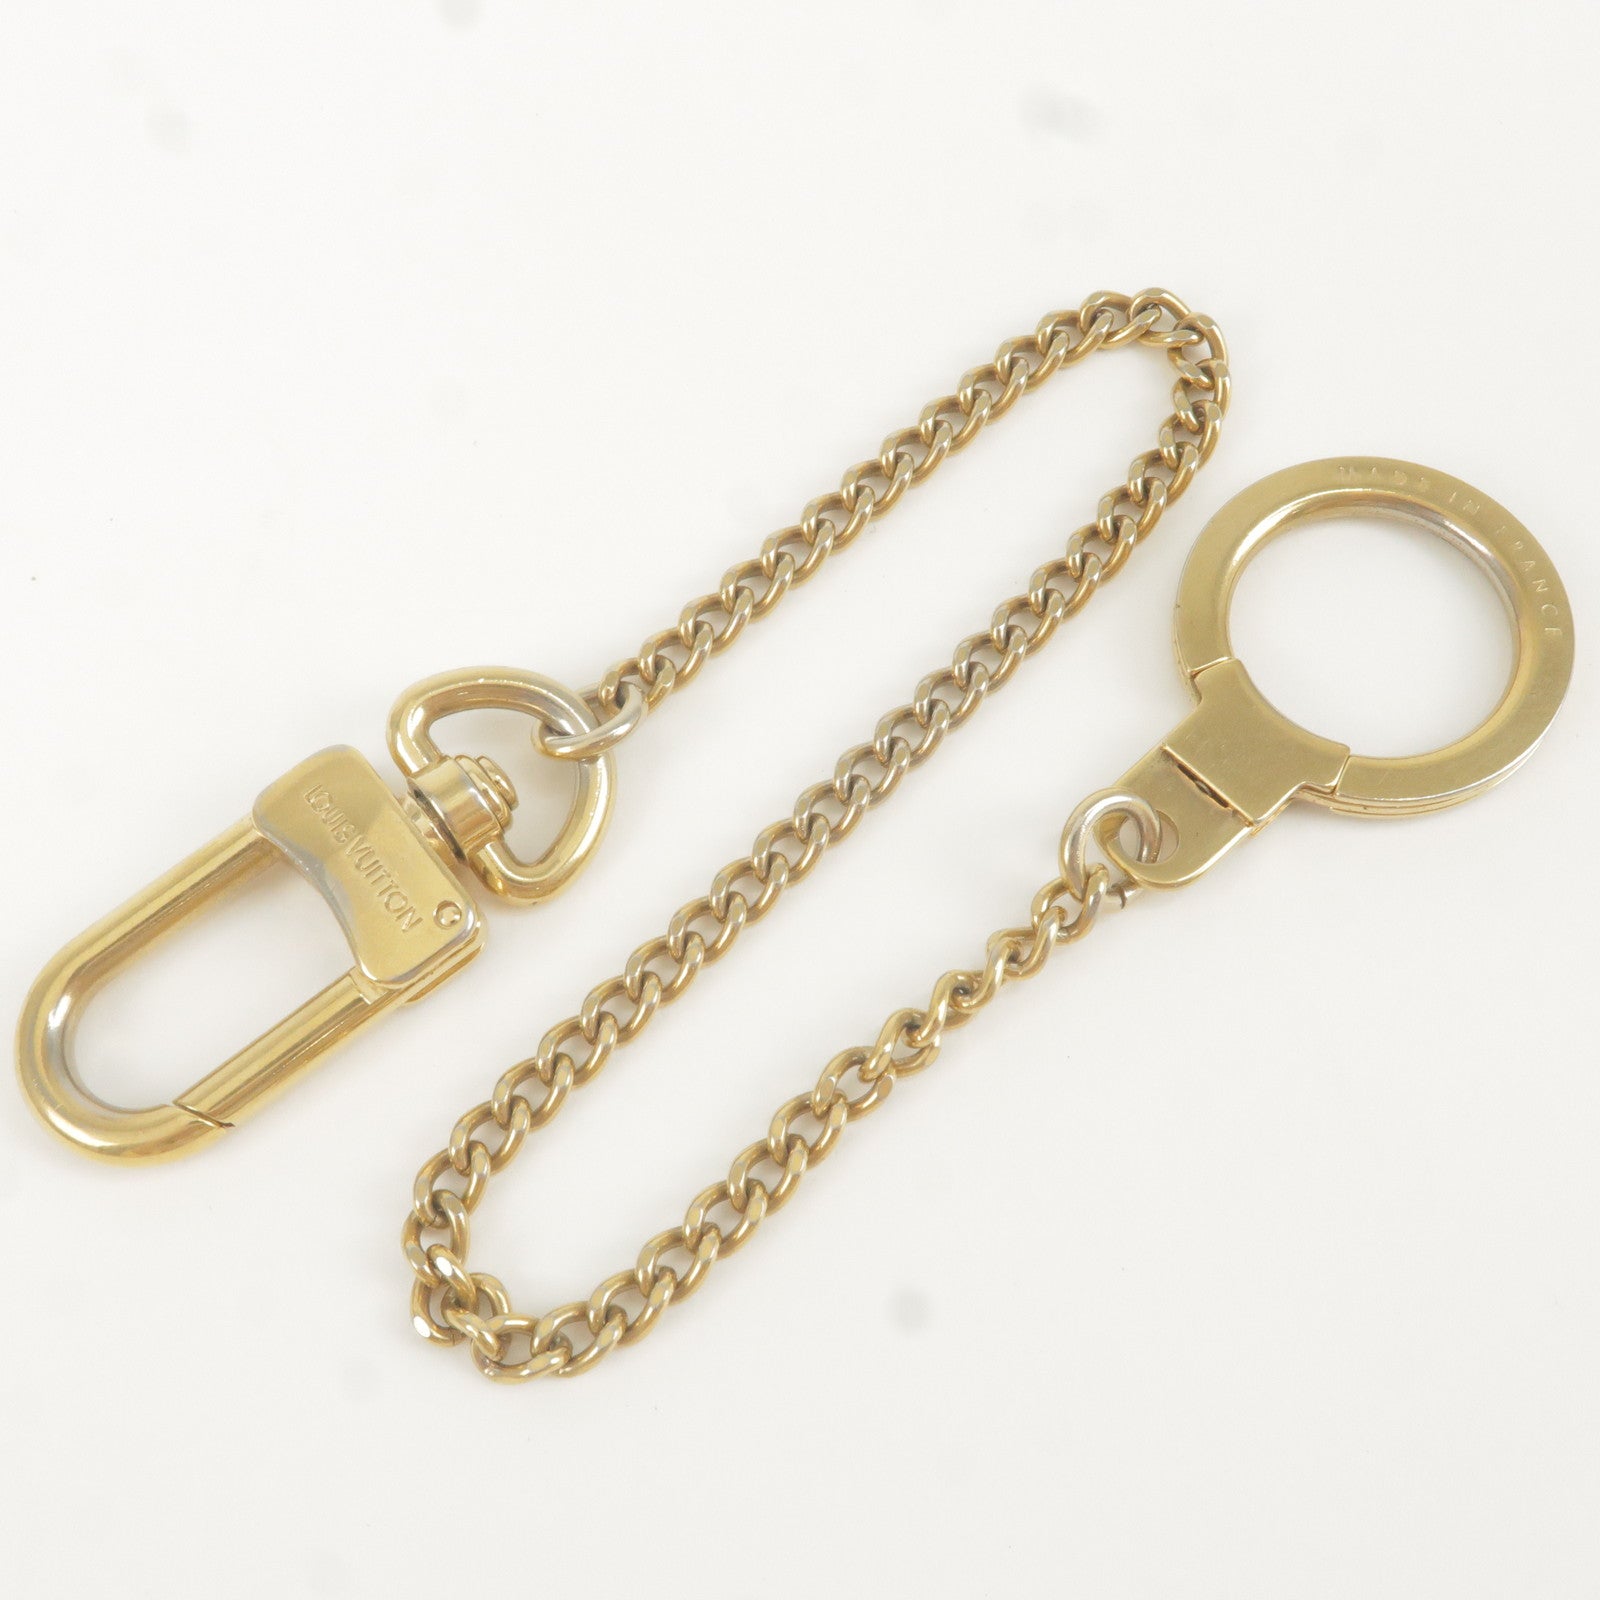 Louis Vuitton Brass Key Chains, Rings & Cases for Men for sale